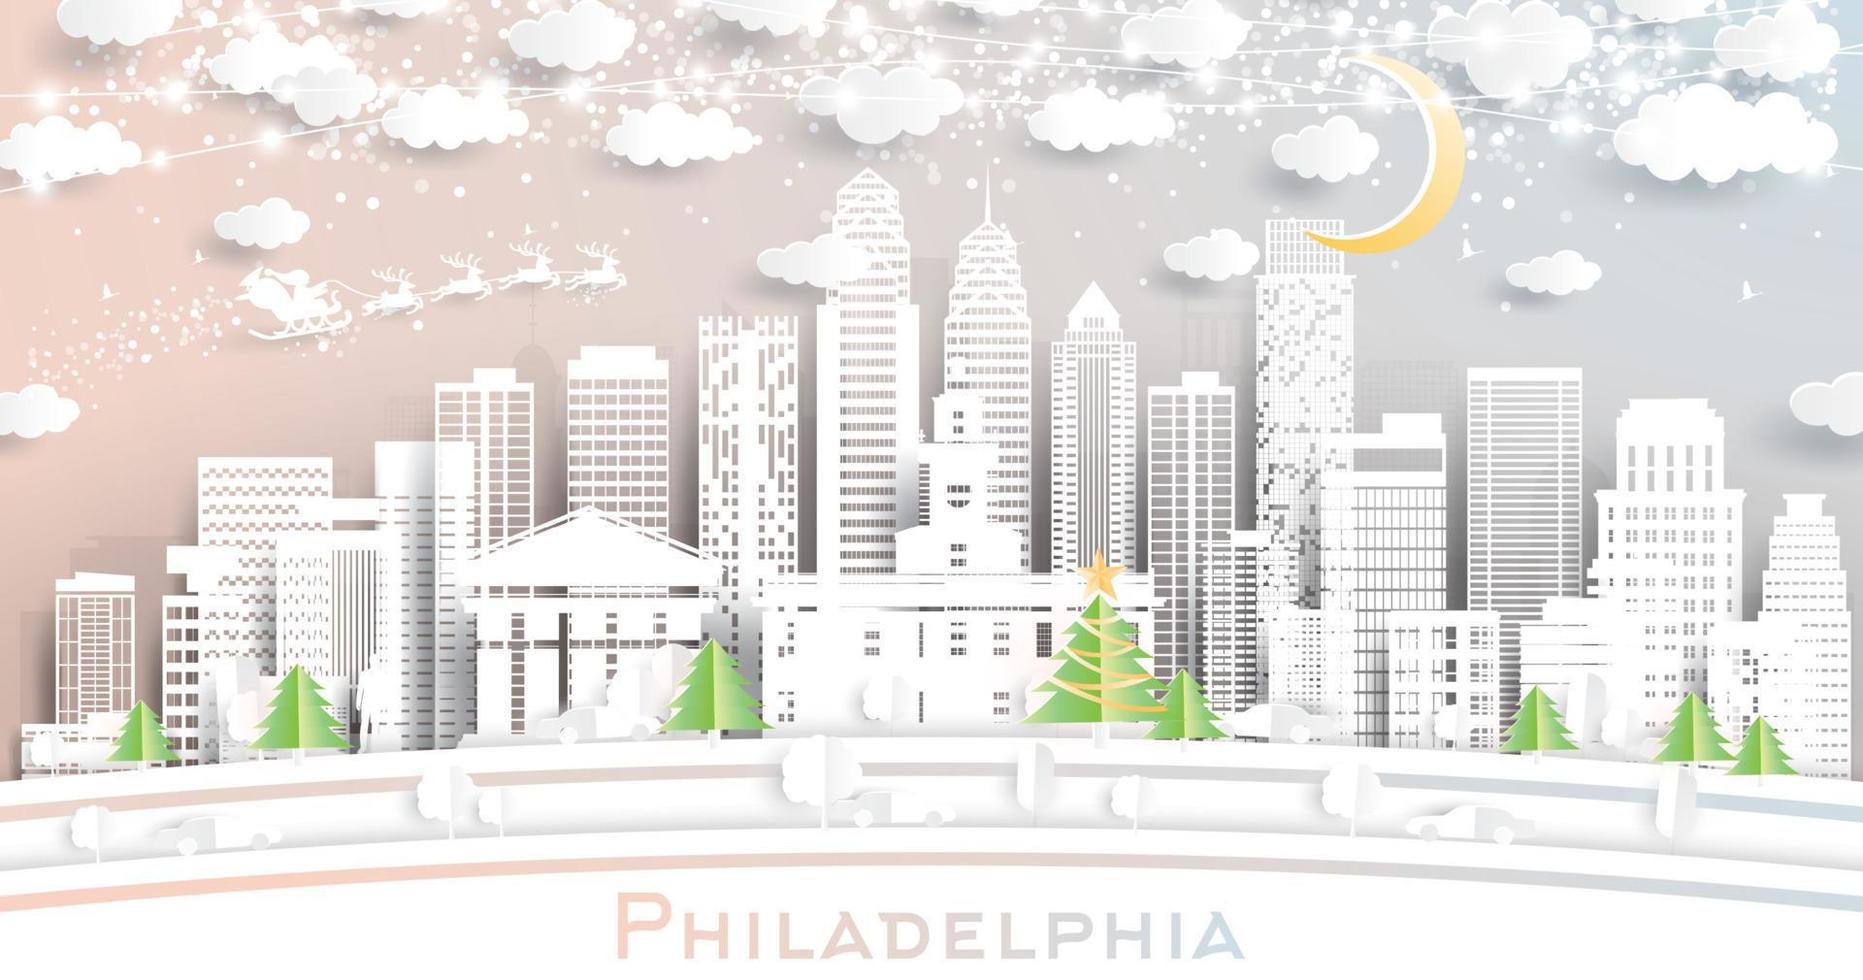 Philadelphia Pennsylvania USA City Skyline in Paper Cut Style with Snowflakes, Moon and Neon Garland. vector